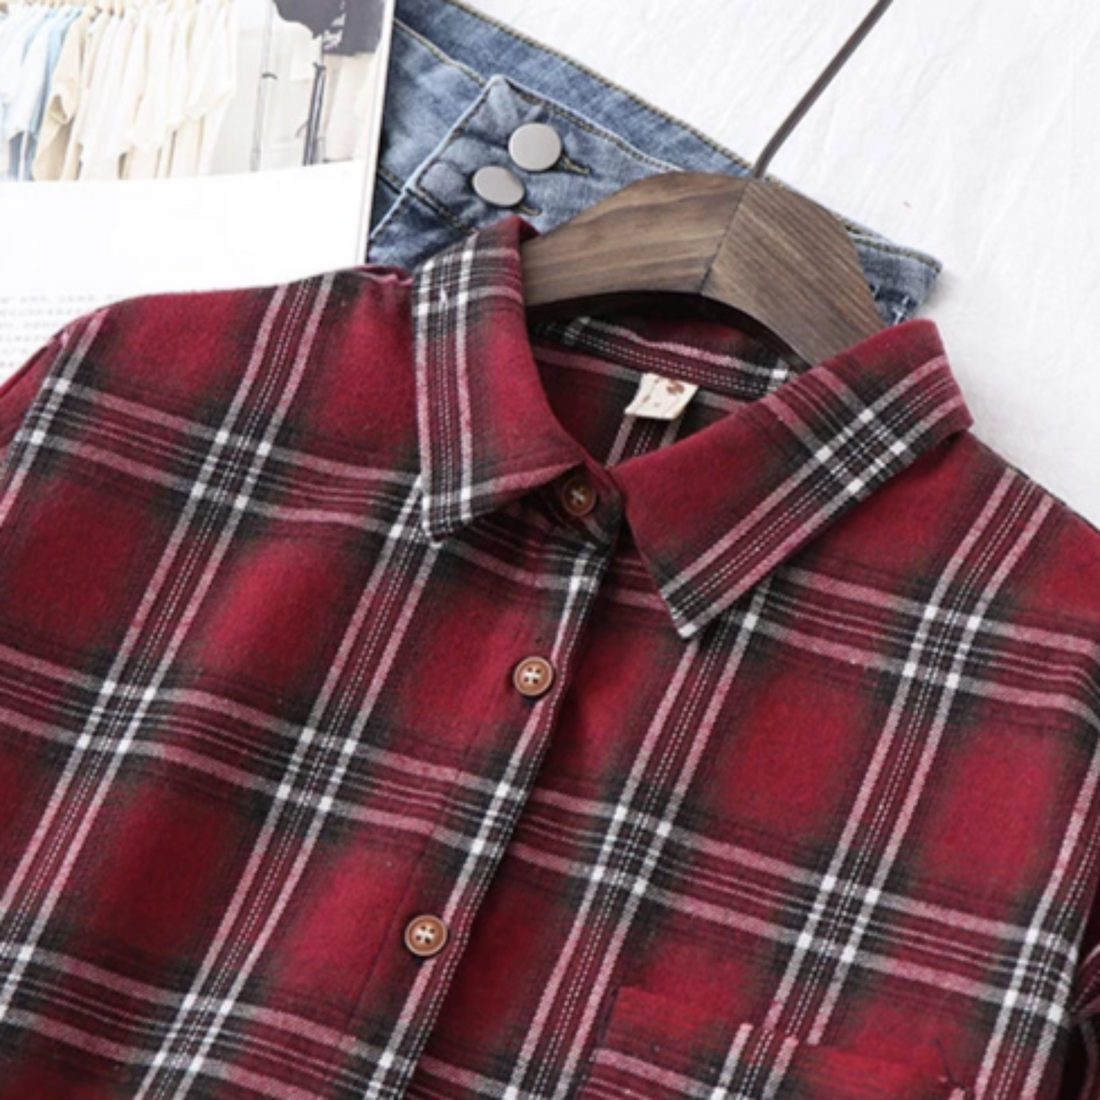 Women's Spring Casual Spandex Loose Plaid Shirt With Pockets